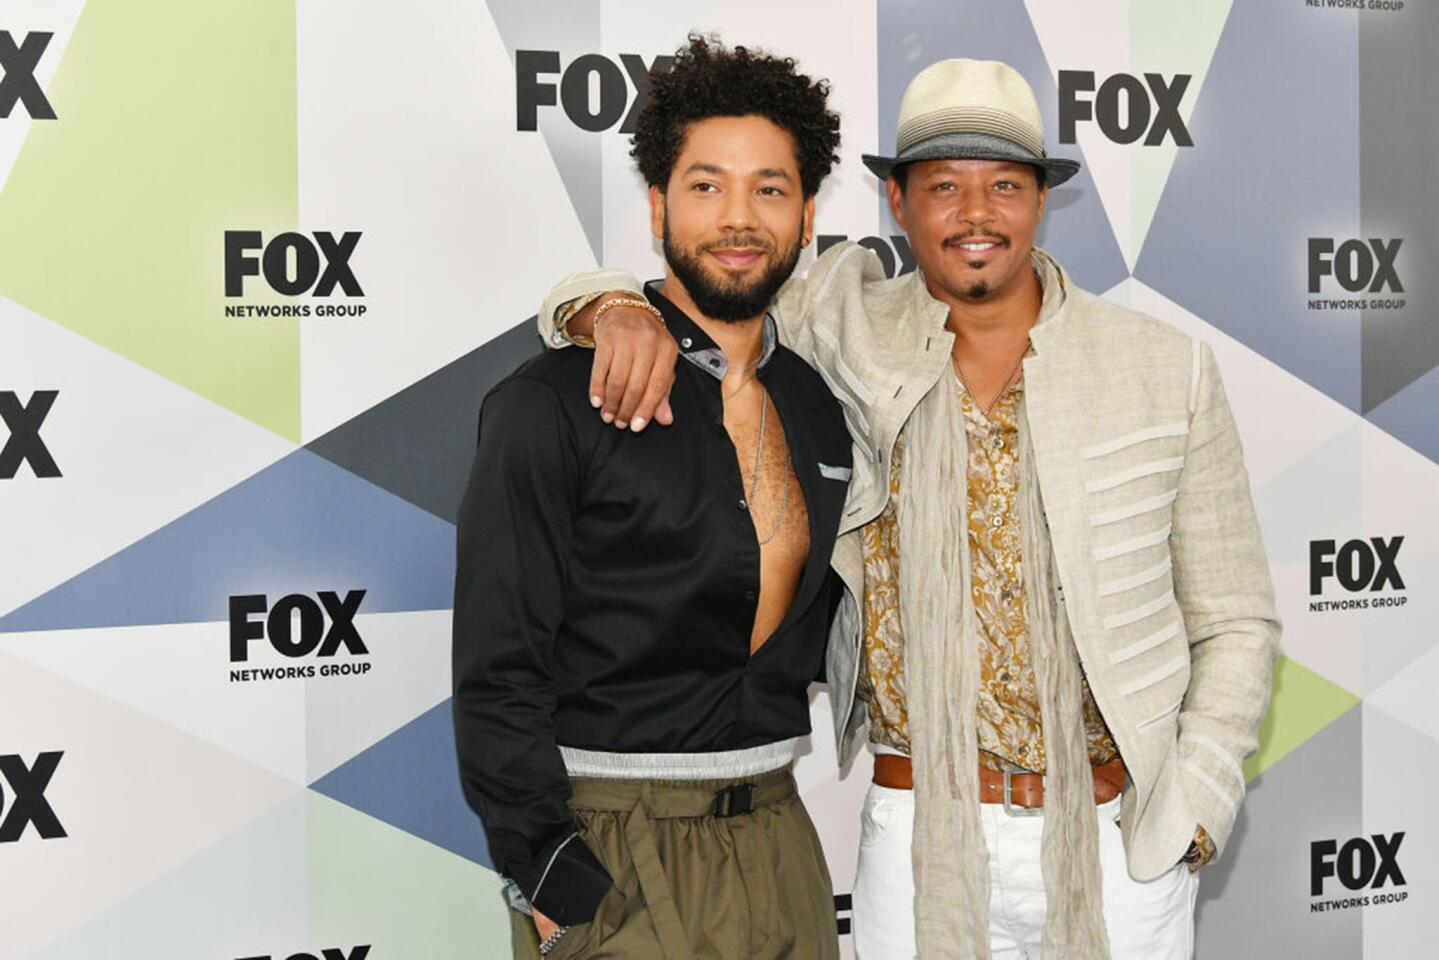 Actors Jussie Smollett, left, and Terrence Howard attend the 2018 Fox Network Upfront at Wollman Rink in New York on May 14, 2018.